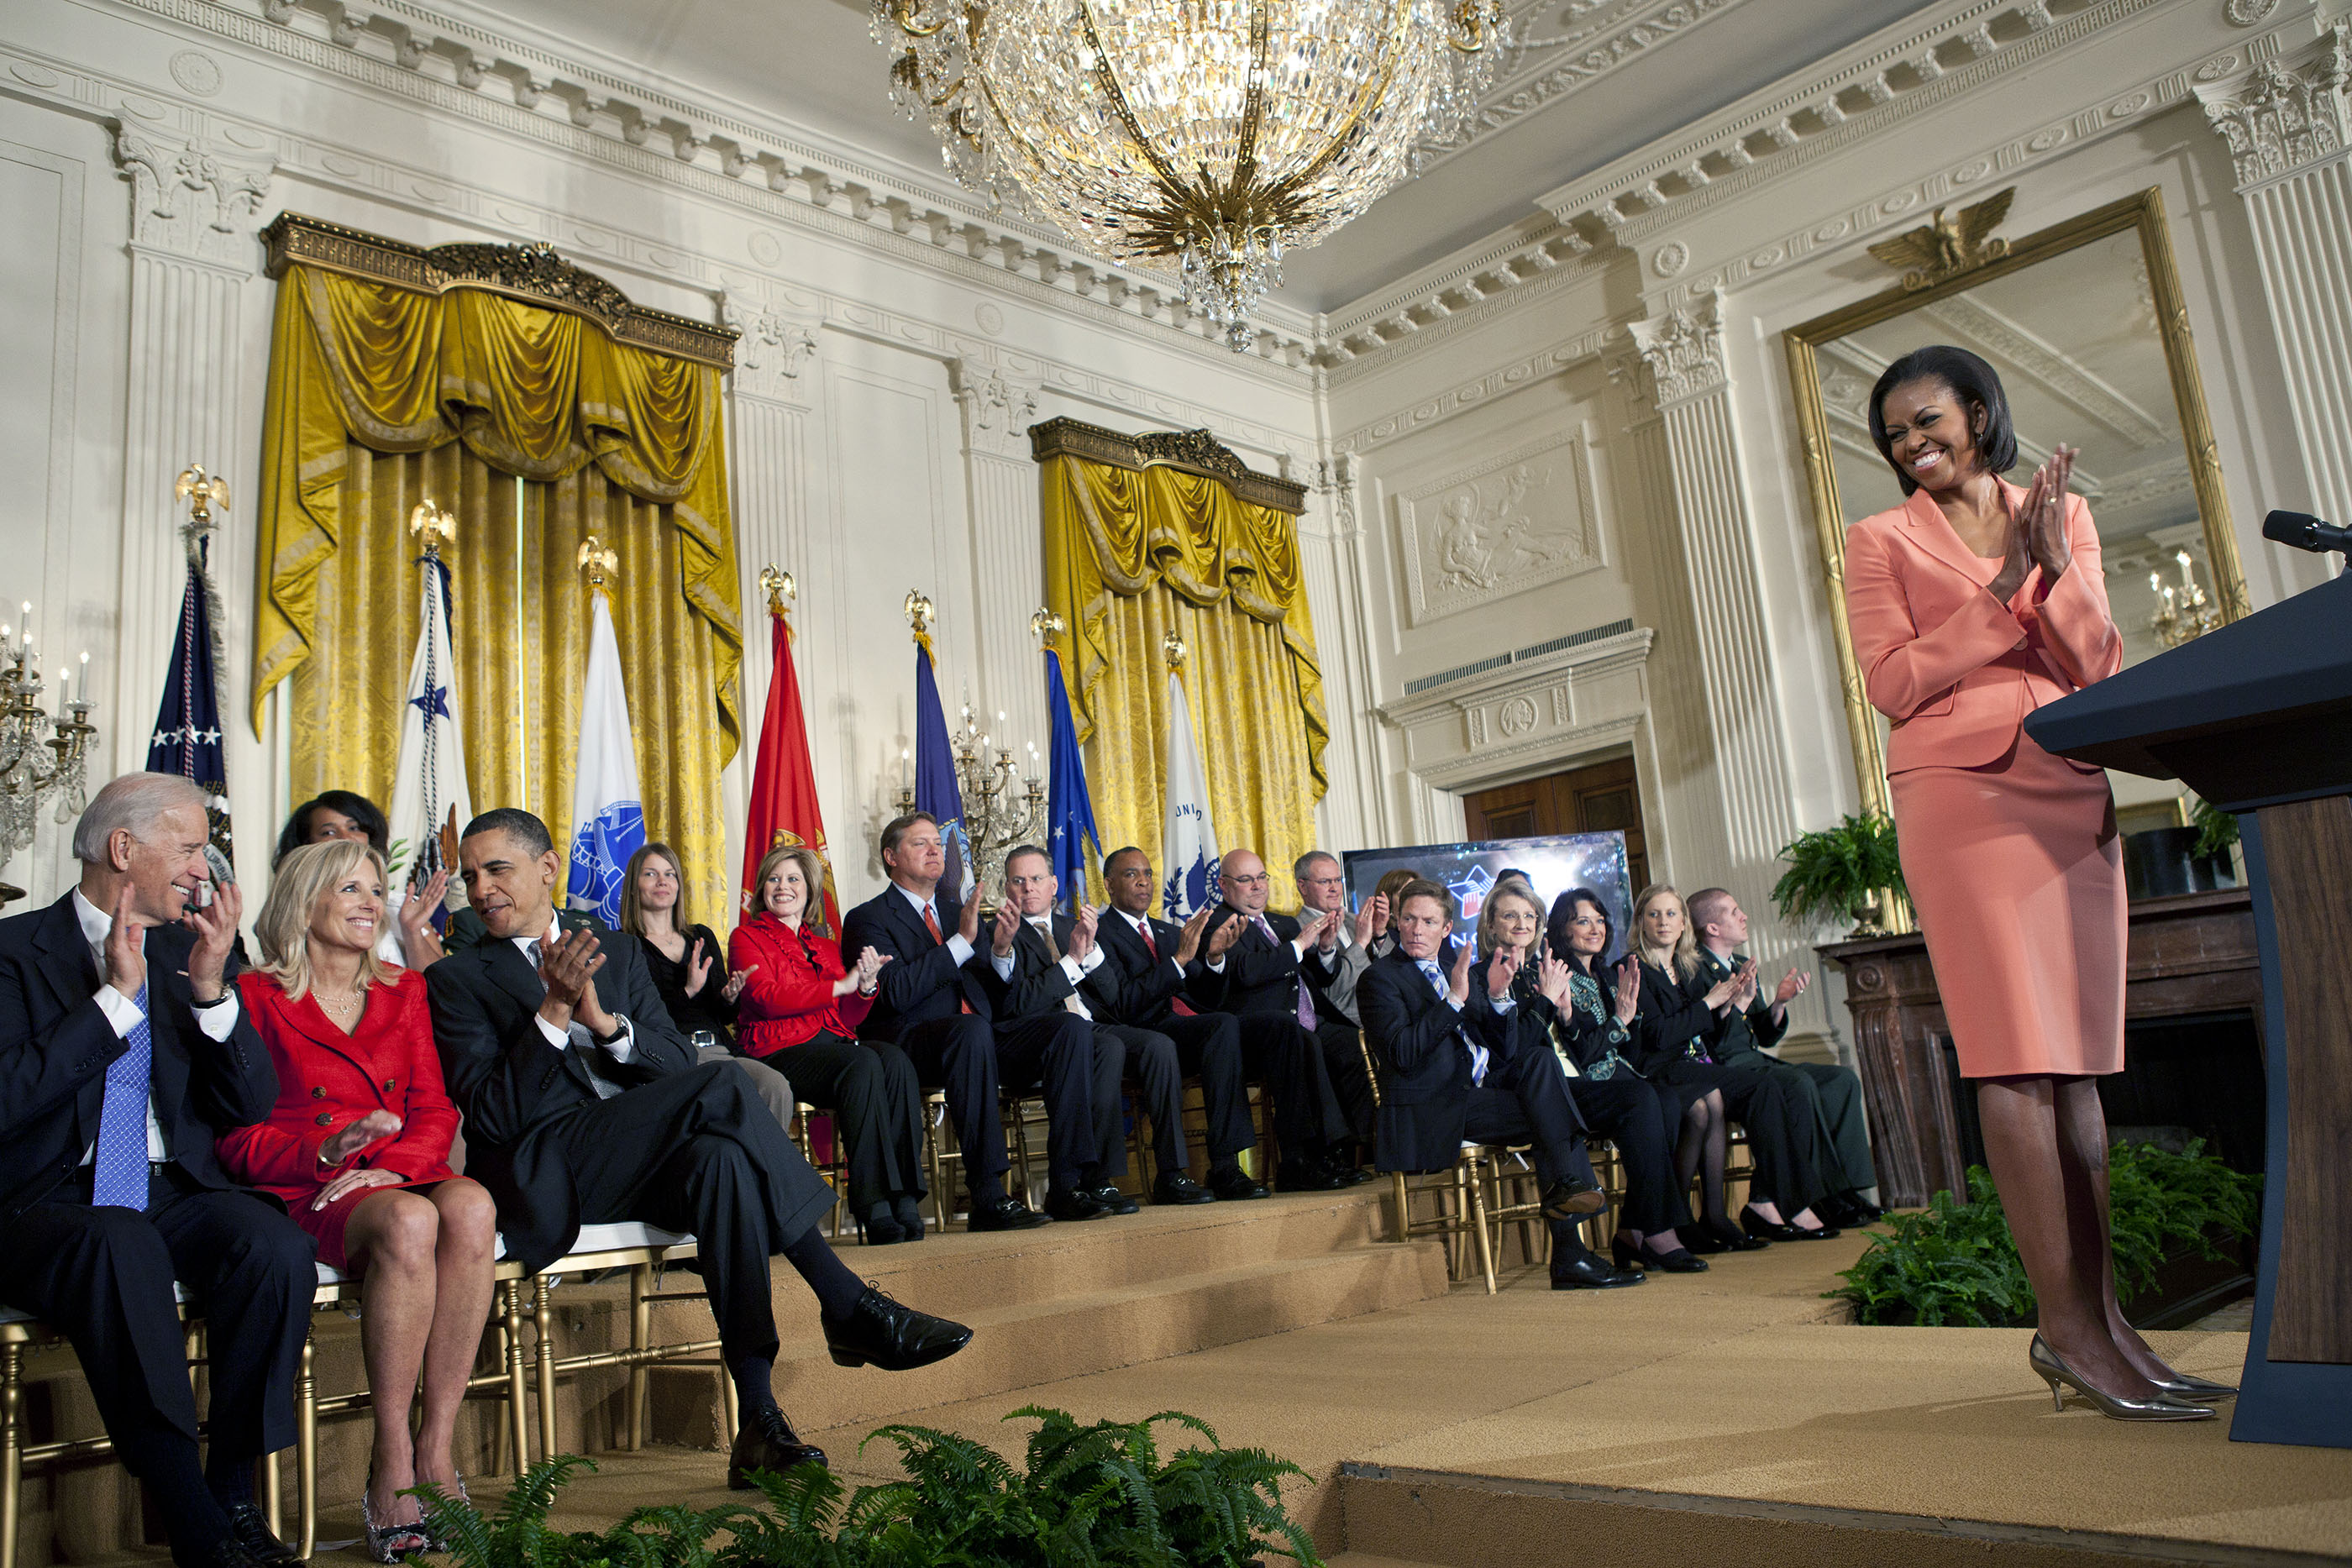 President Barack Obama, First Lady Michelle Obama, Vice President Joe Biden, and Dr. Jill Biden launch the Joining Forces initiative to support and honor America's service members and their families, in the East Room of the White House, April 12, 2011. (Official White House Photo by Samantha Appleton)